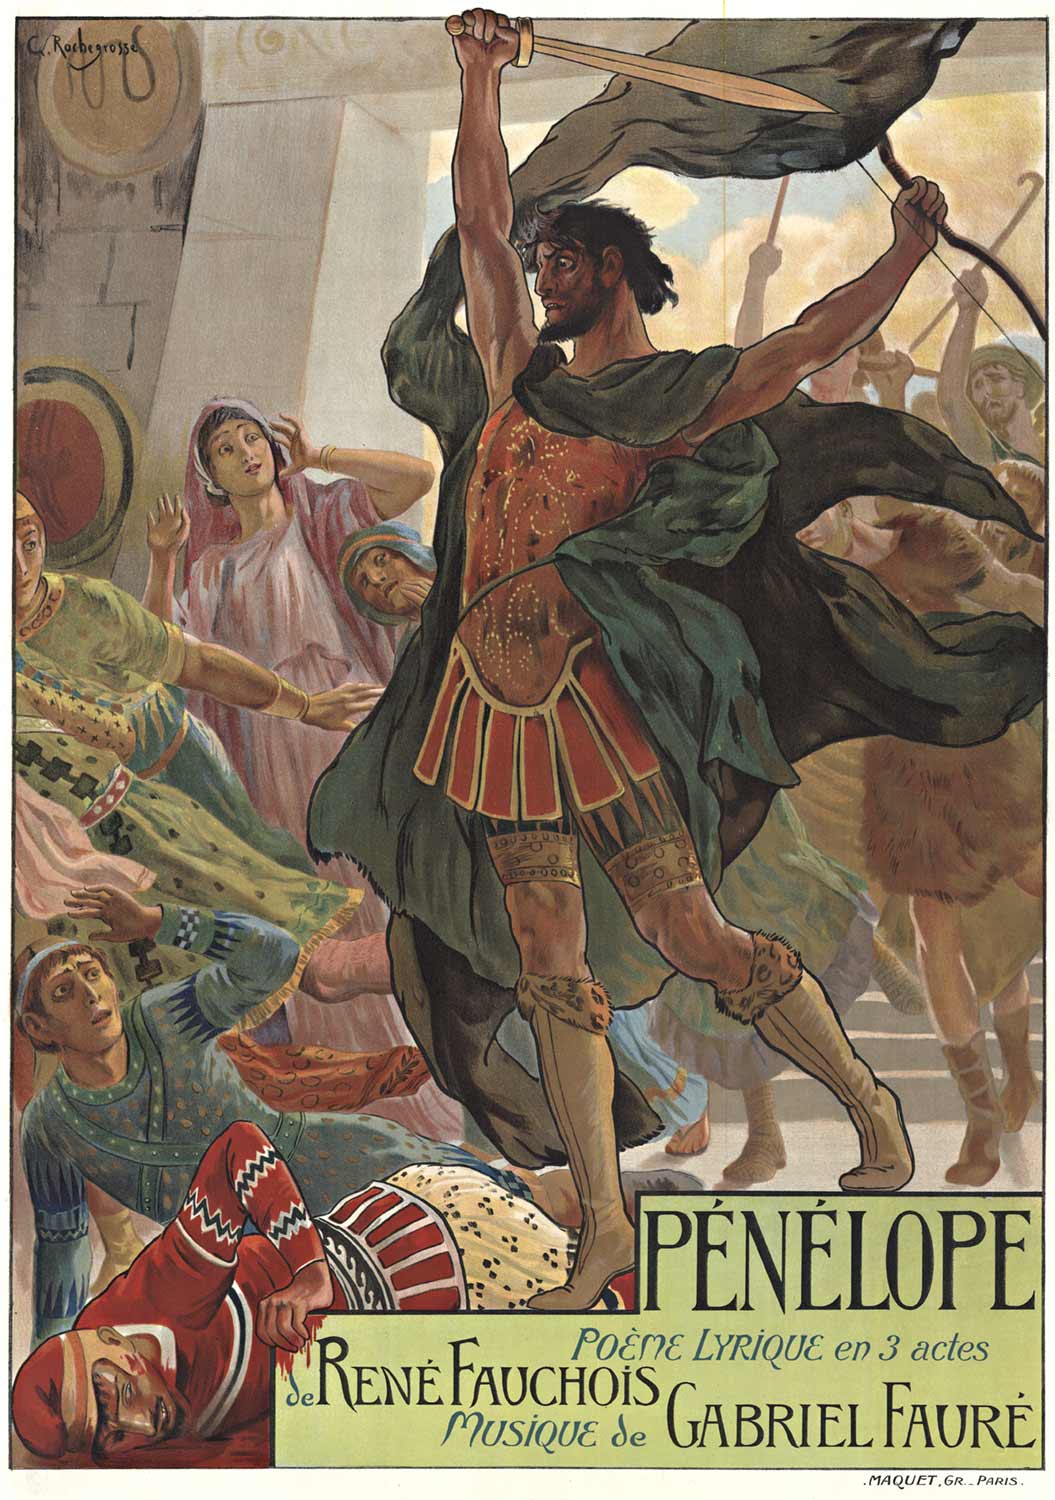 Original linen backed mint condition stone lithograph opera poster for Penelope. Done in 1913 by the great lithographer Georges Rochengrosse who created several opera posters at the turn of the century. Imprimerie Maquet, Paris. Penelope is a 1913 o